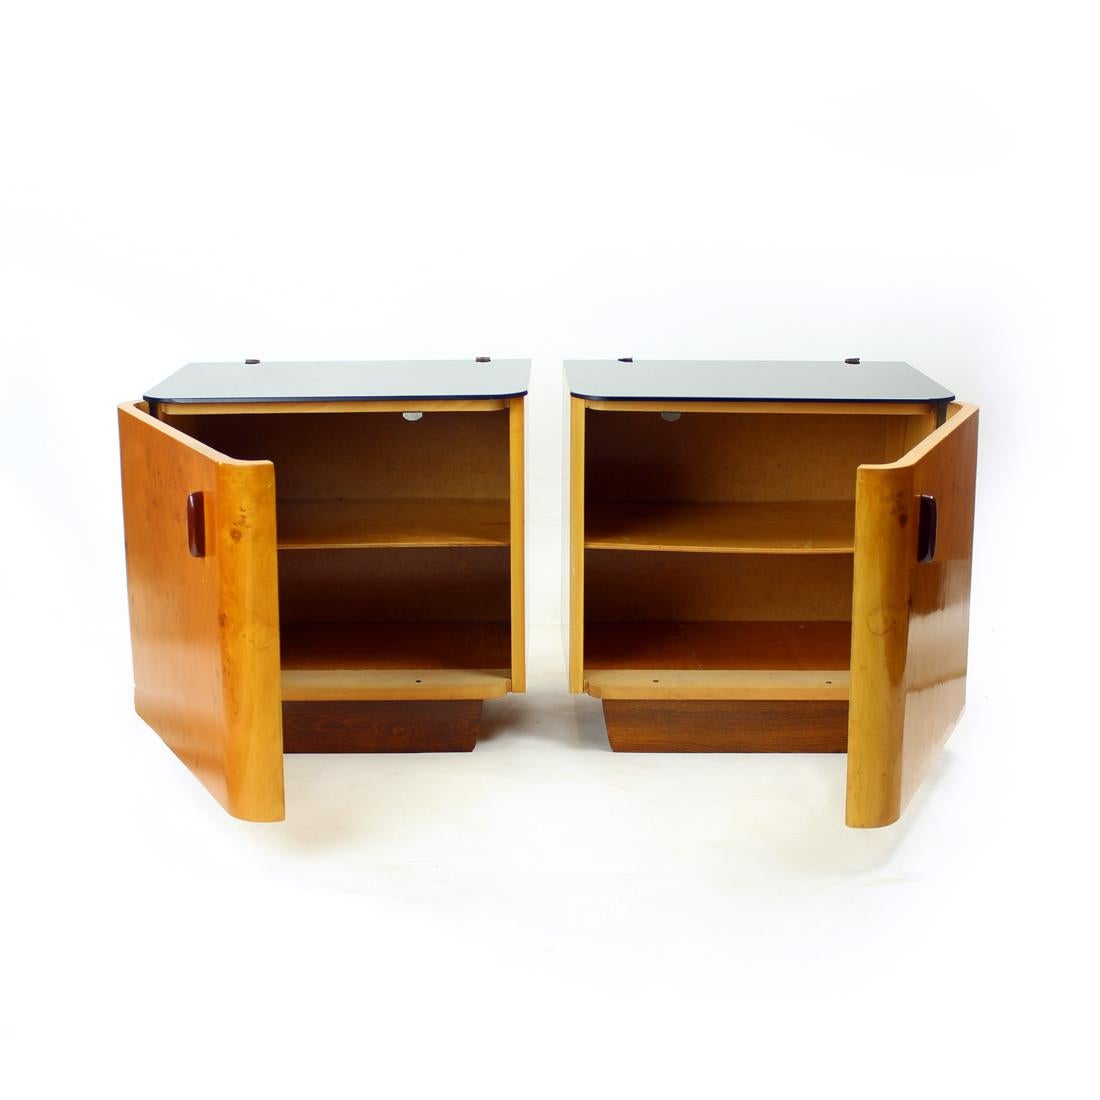 Set of two beautiful art deco bedside tables. Produced in Czechoslovakia in 1940s. The tables are square, made of beautiful walnut wood with amazing patters. The tables are in original, excellent condition. Each table has doors with rounded corner.